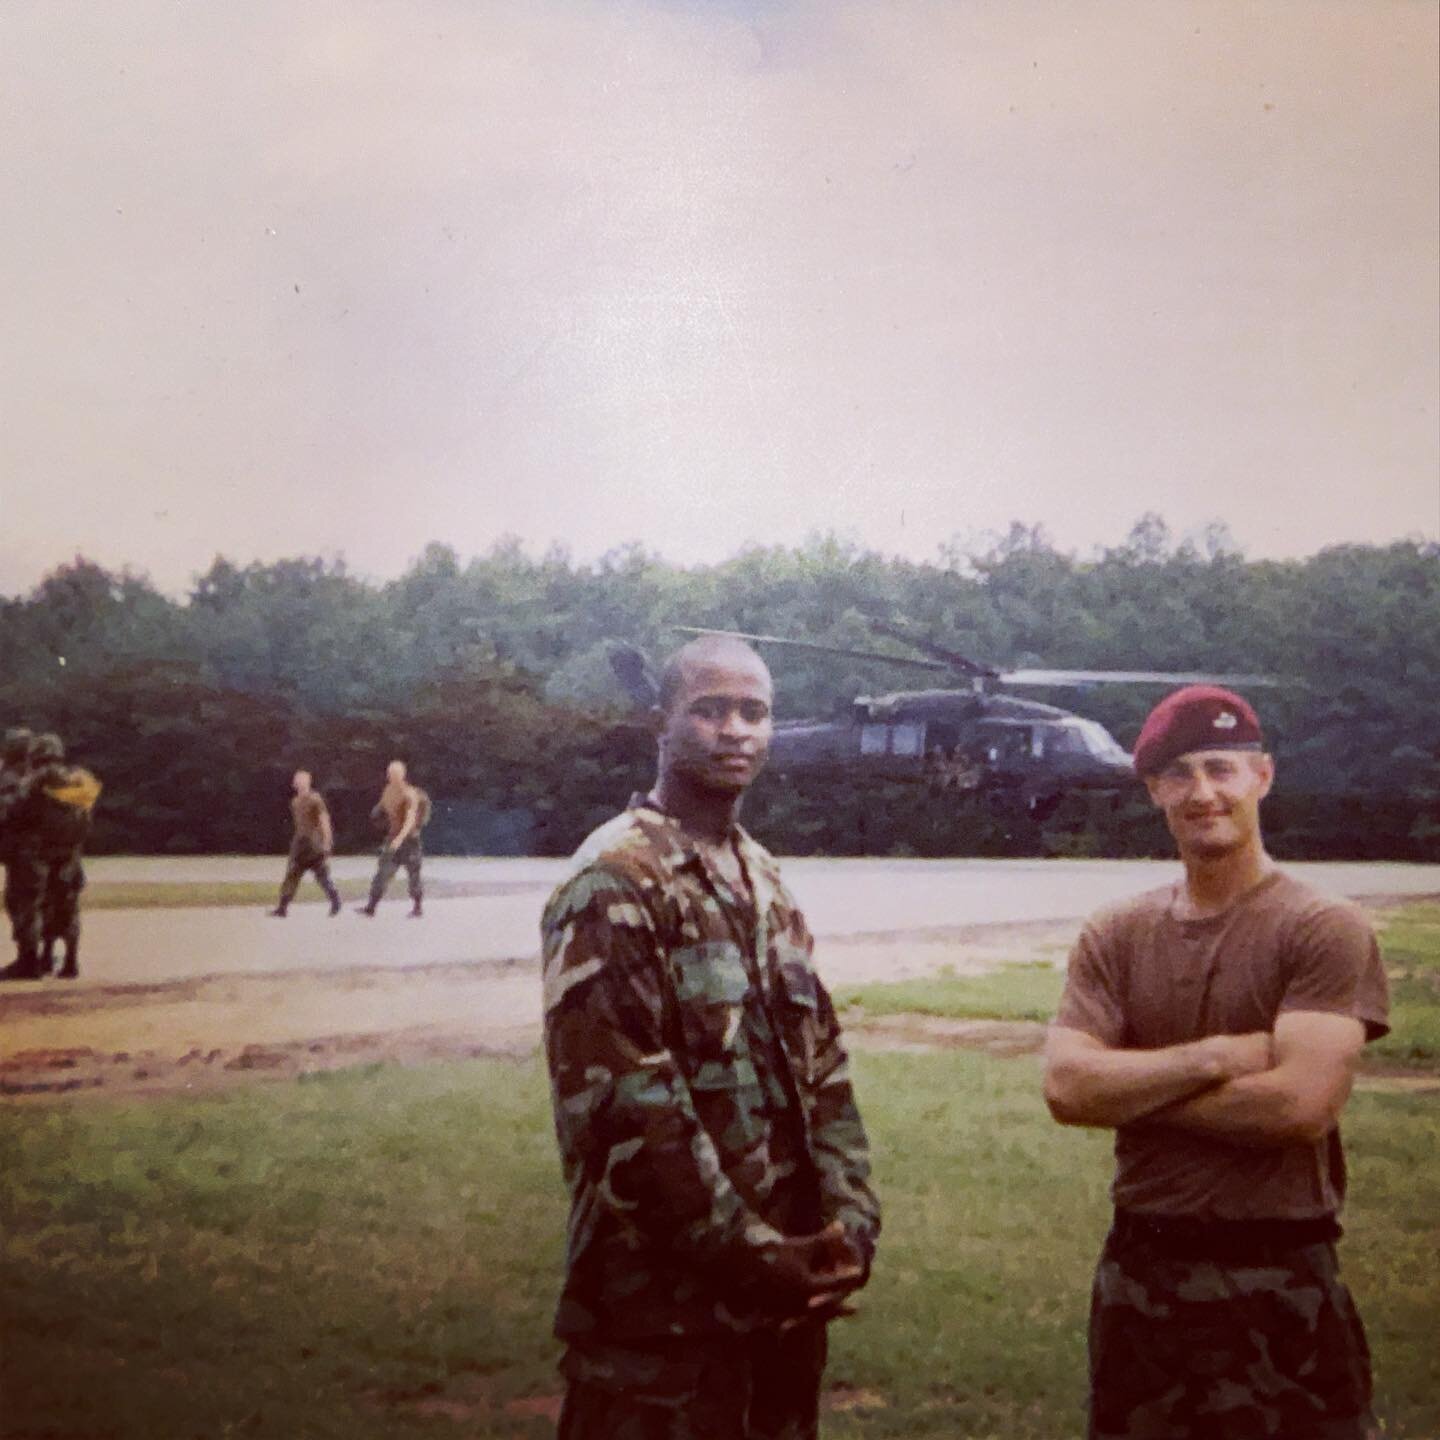 Circa 2003. Me and my friend Joel from Jamaica about to jump out of a Blackhawk. Serving in the Army was one of the best decisions I&rsquo;ve ever made. I learned discipline, leadership and how to clean with exceptional attention to detail.

Thank yo